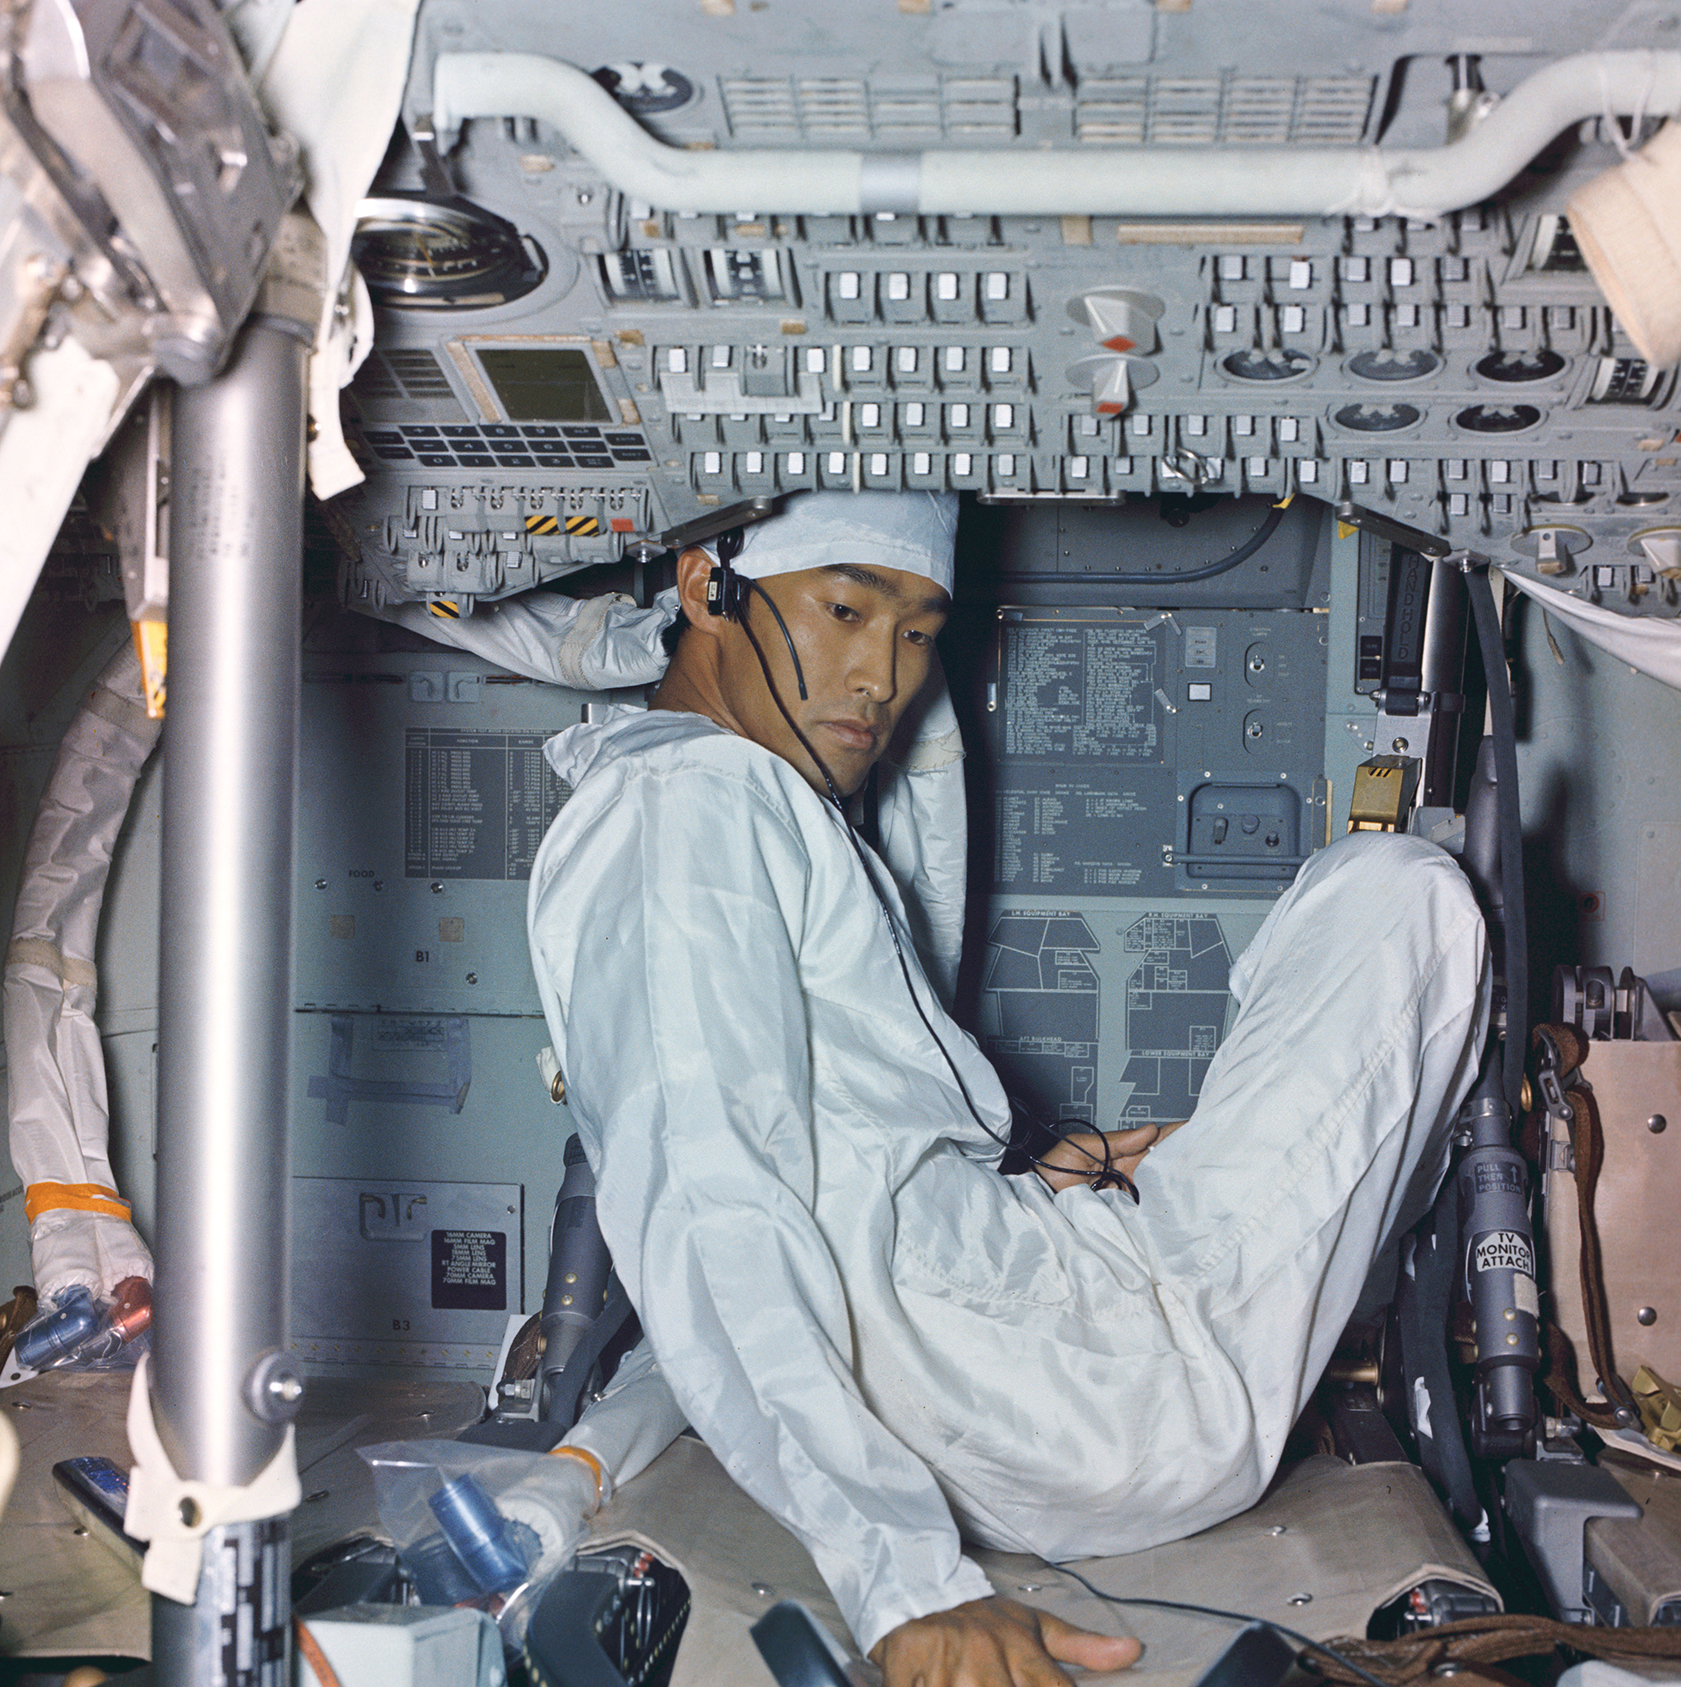 All three Apollo 11 astronauts were quarantined for several weeks following the mission at the Lunar Receiving Laboratory at the Johnson Space Center in Texas. Quarantined with them was a photographer and technician, John Hirasaki, who was given the job of removing essential items from the Command Module and decontaminating the interior. This image was taken during the quarantine period and shows the condition of the cabin shortly after its arrival back in the country. Note the calendar visible just to the left of Hirasaki. Photo: NASA 